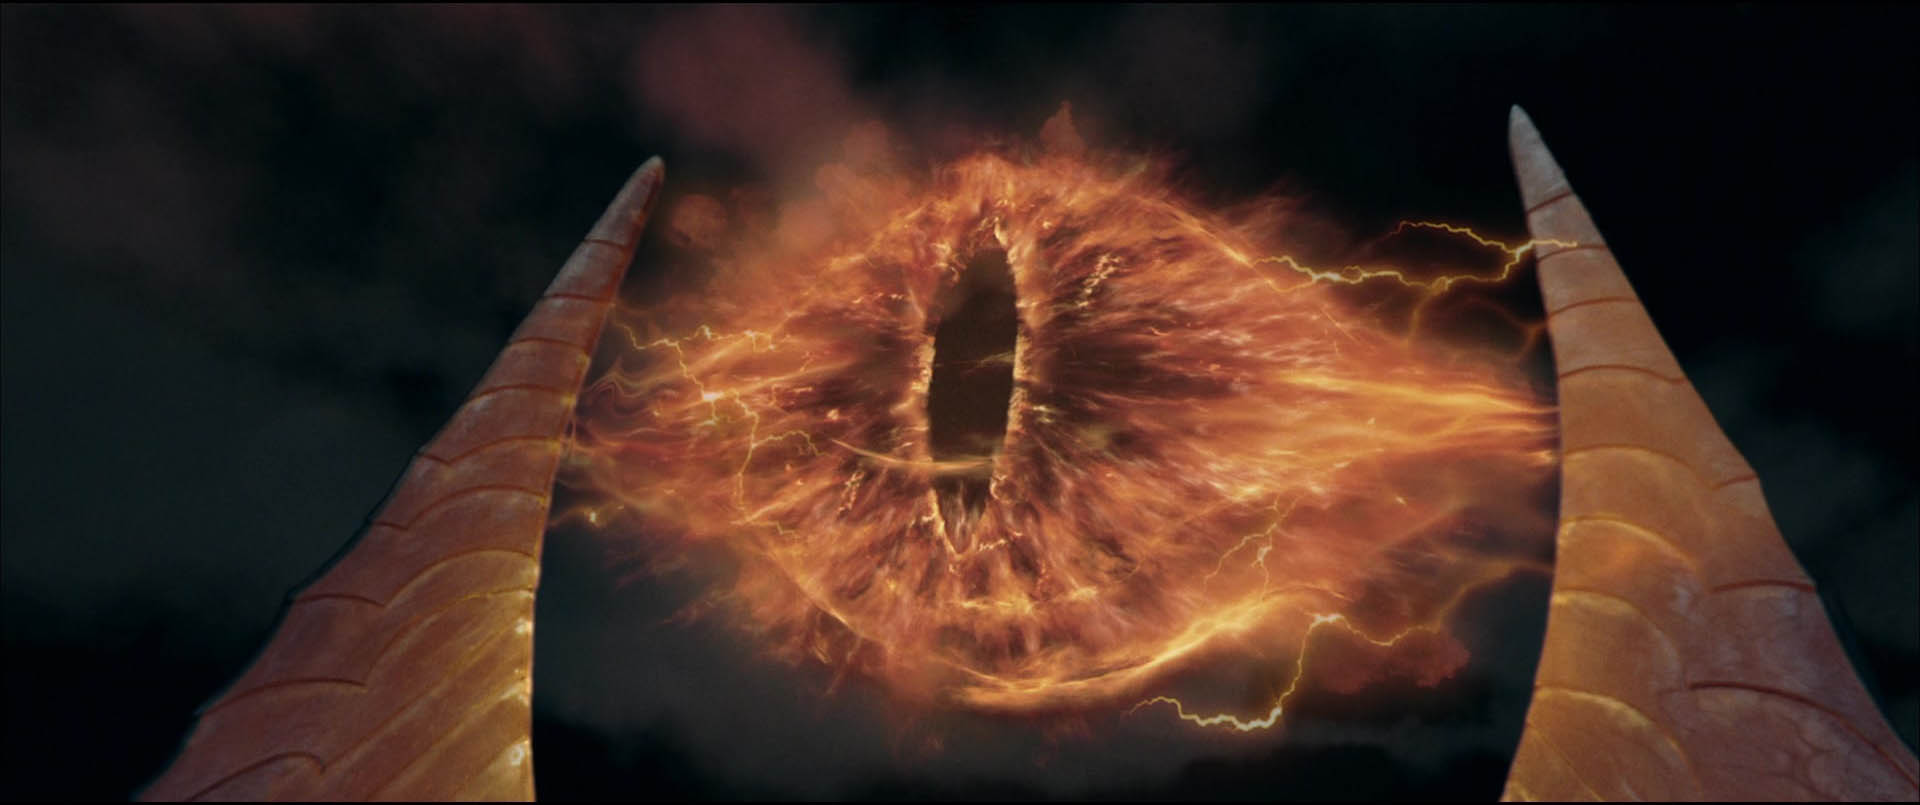 51 – The Eye of Sauron | Panoply